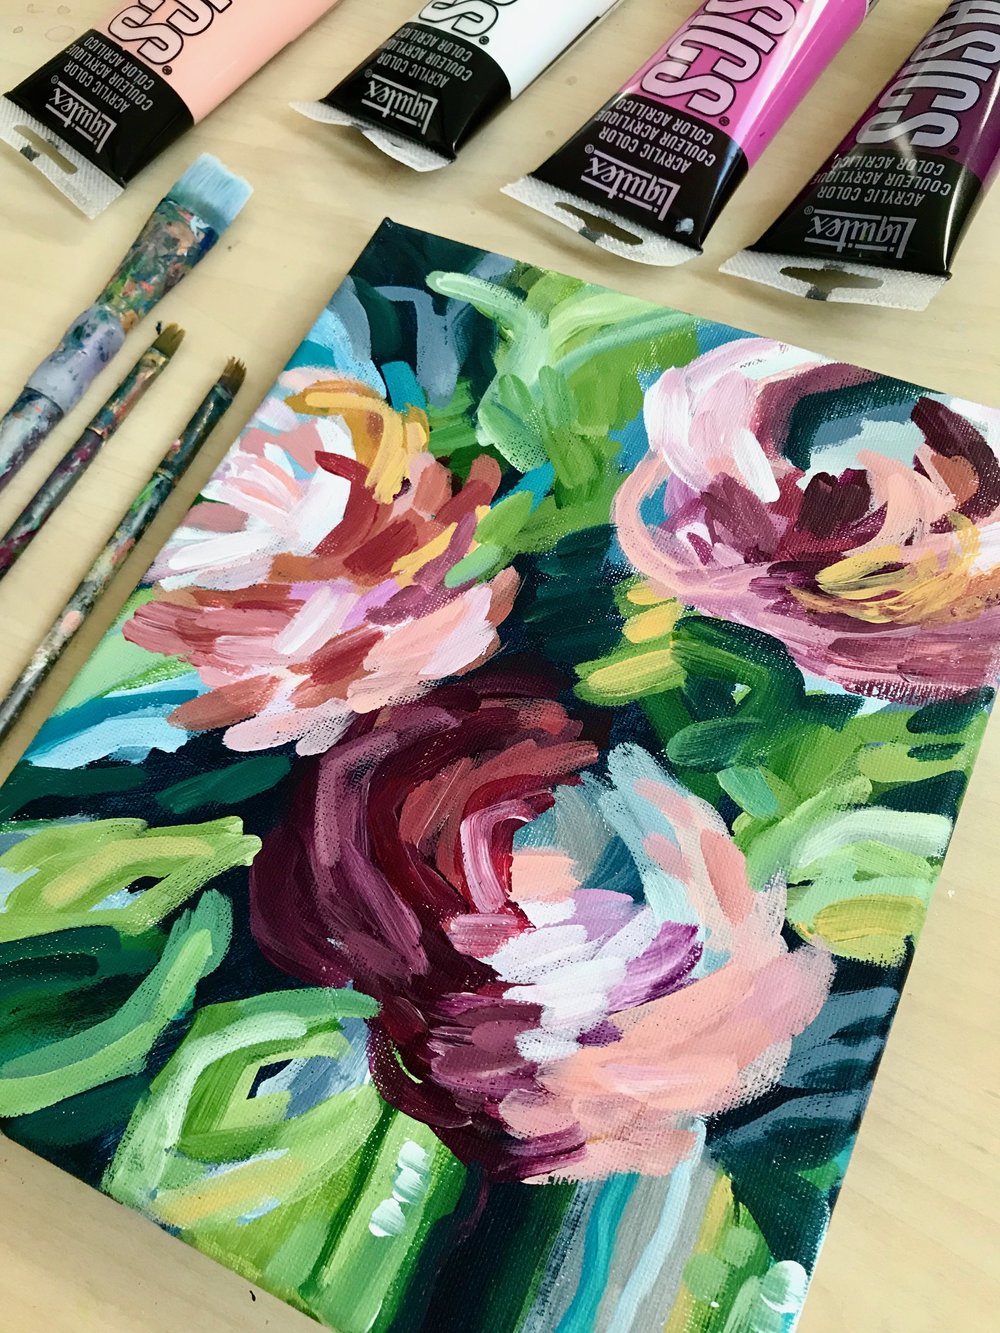 Learn How To Paint Abstract Flowers On Canvas With Acrylic Paint Easy To Follow Step By Step Elle Byers Art Have simple objects, like flowers or nature on your paper. elle byers art